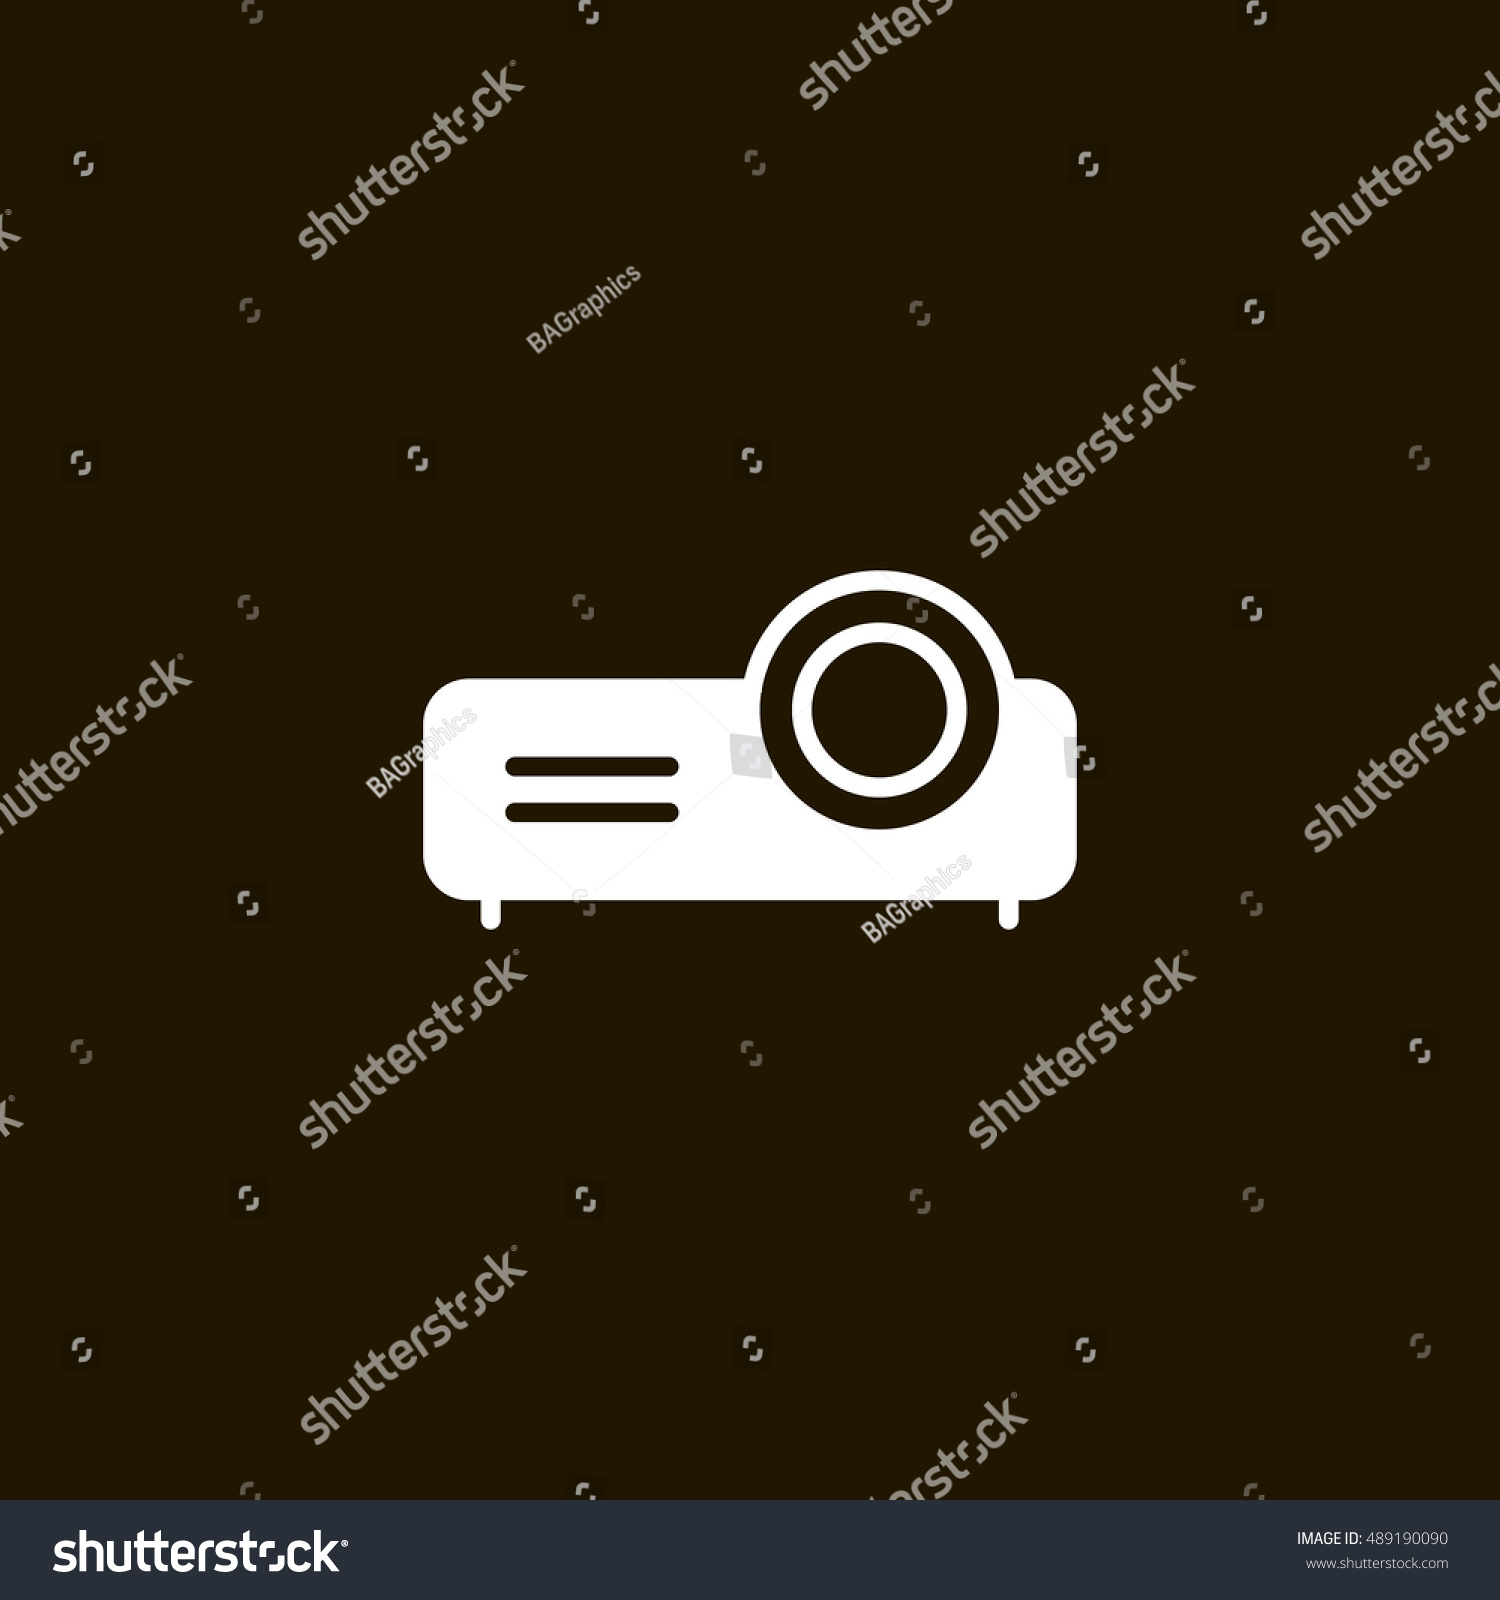 SVG of Projector icon vector, clip art. Also useful as logo, web element, symbol, graphic image, silhouette and illustration. Compatible with ai, cdr, jpg, png, svg, pdf, ico and eps. svg